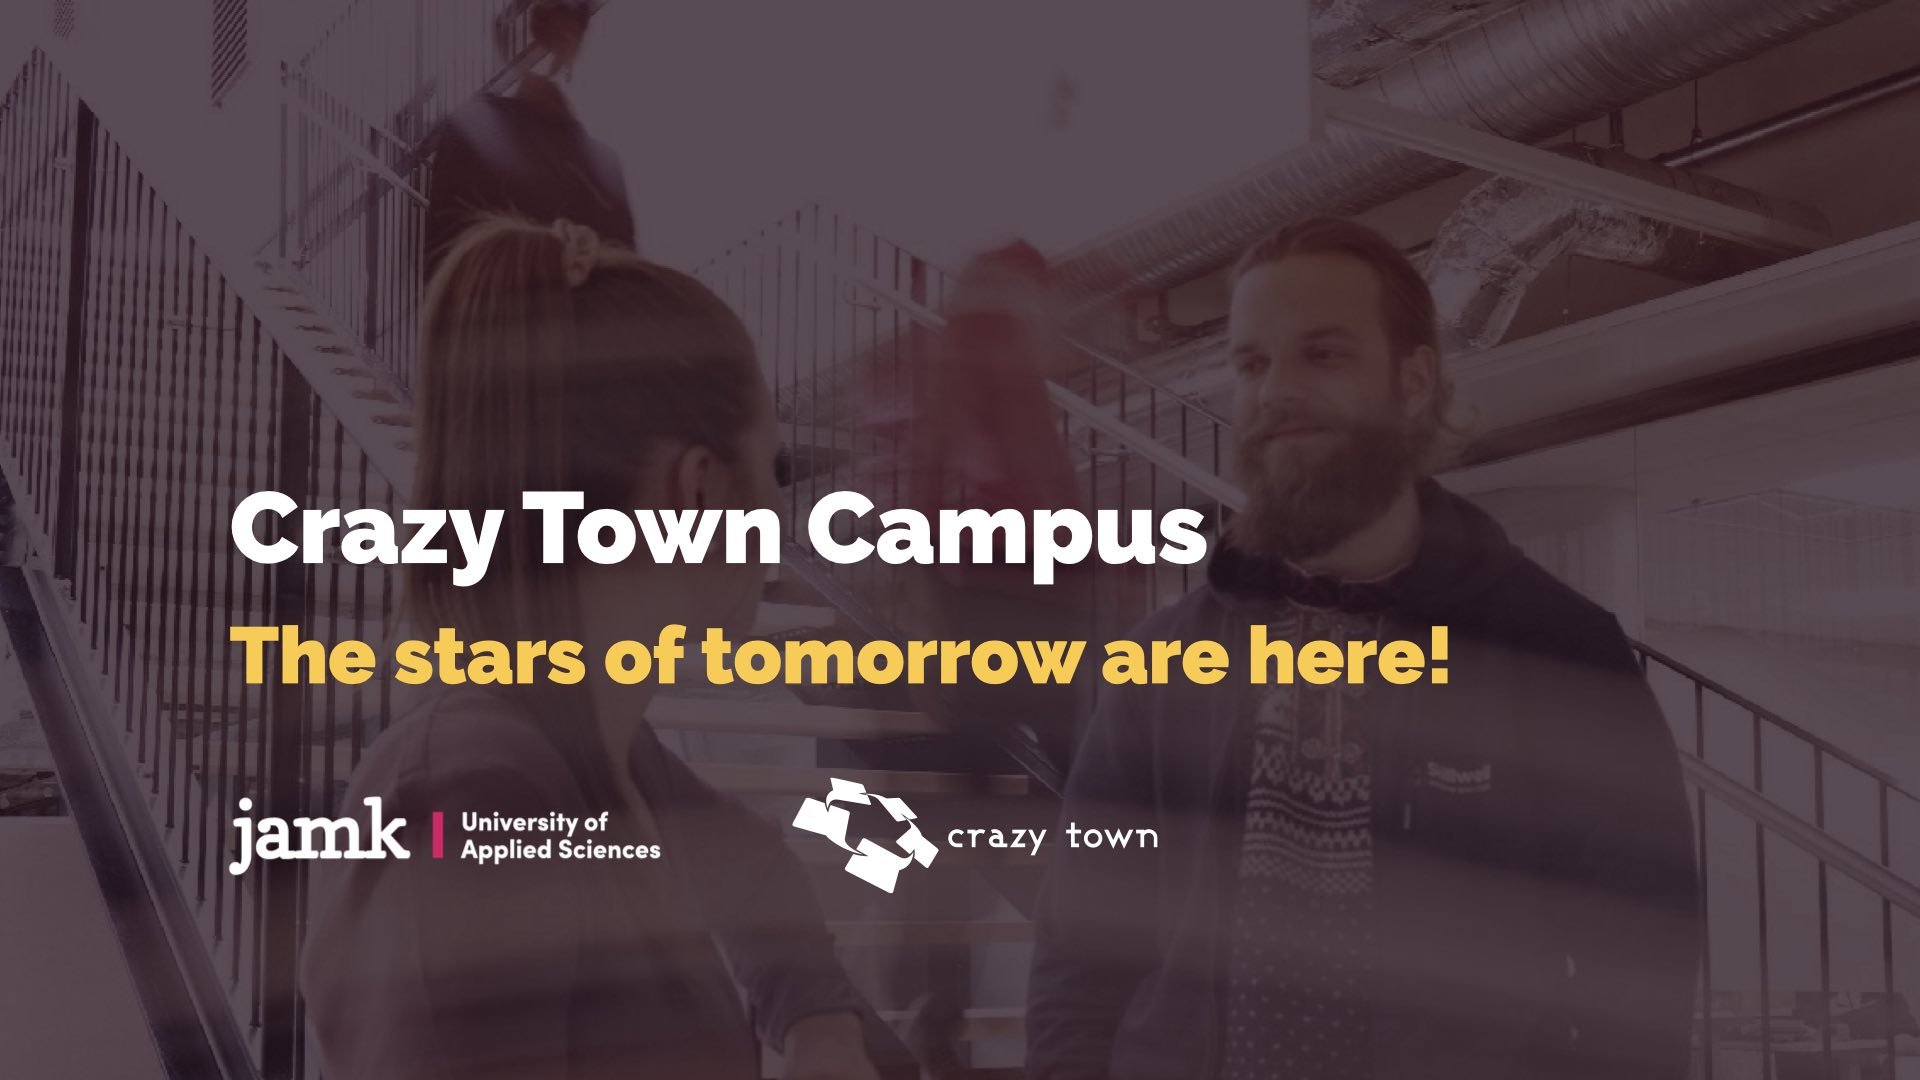 Featured image for “Crazy Town Campus – The stars of tomorrow are here!”